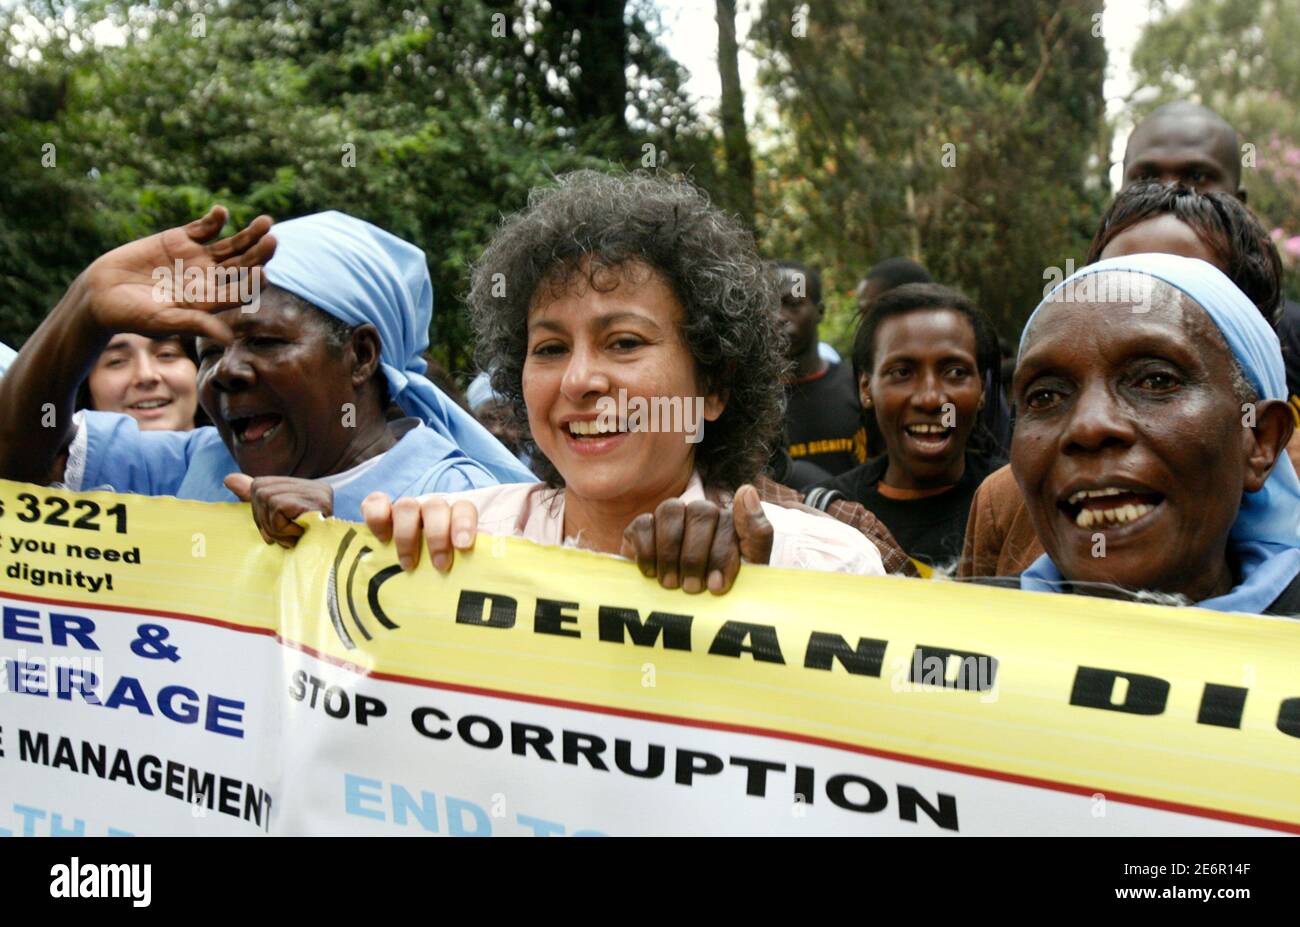 Amnesty International Secretary-General Irene Khan (C) participates in a demonstration with people from settlements in Nairobi to voice their demand for the right to adequate housing, June 11, 2009. REUTERS/Thomas Mukoya (KENYA SOCIETY CONFLICT POLITICS) Stock Photo